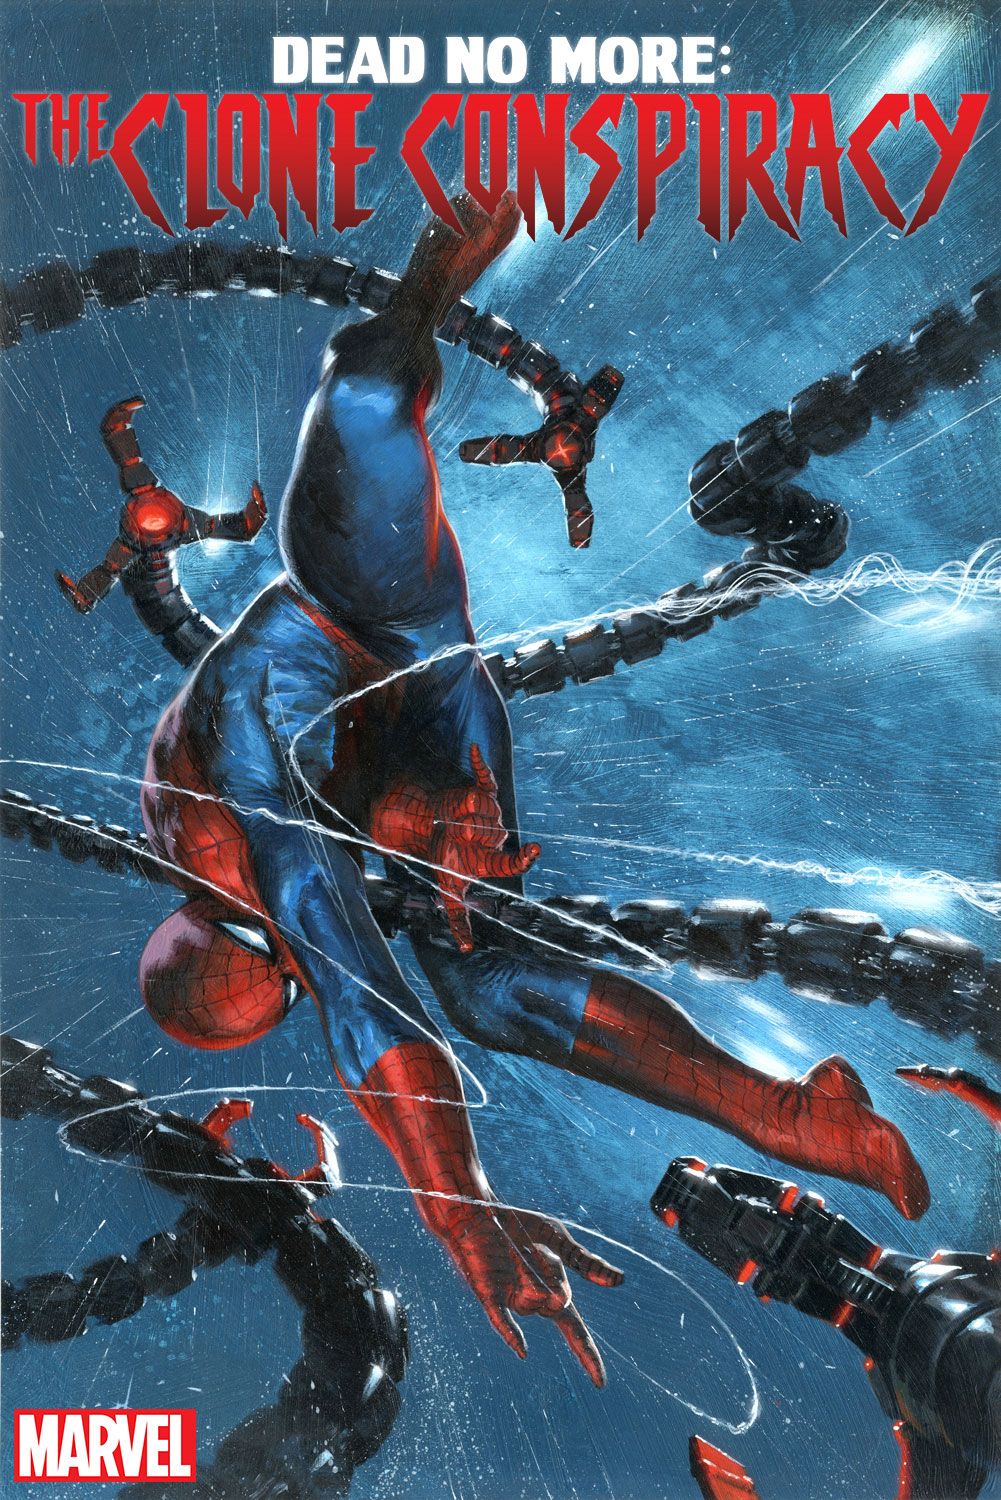 The Clone Conspiracy #2 cover by Gabriele Dell’Otto